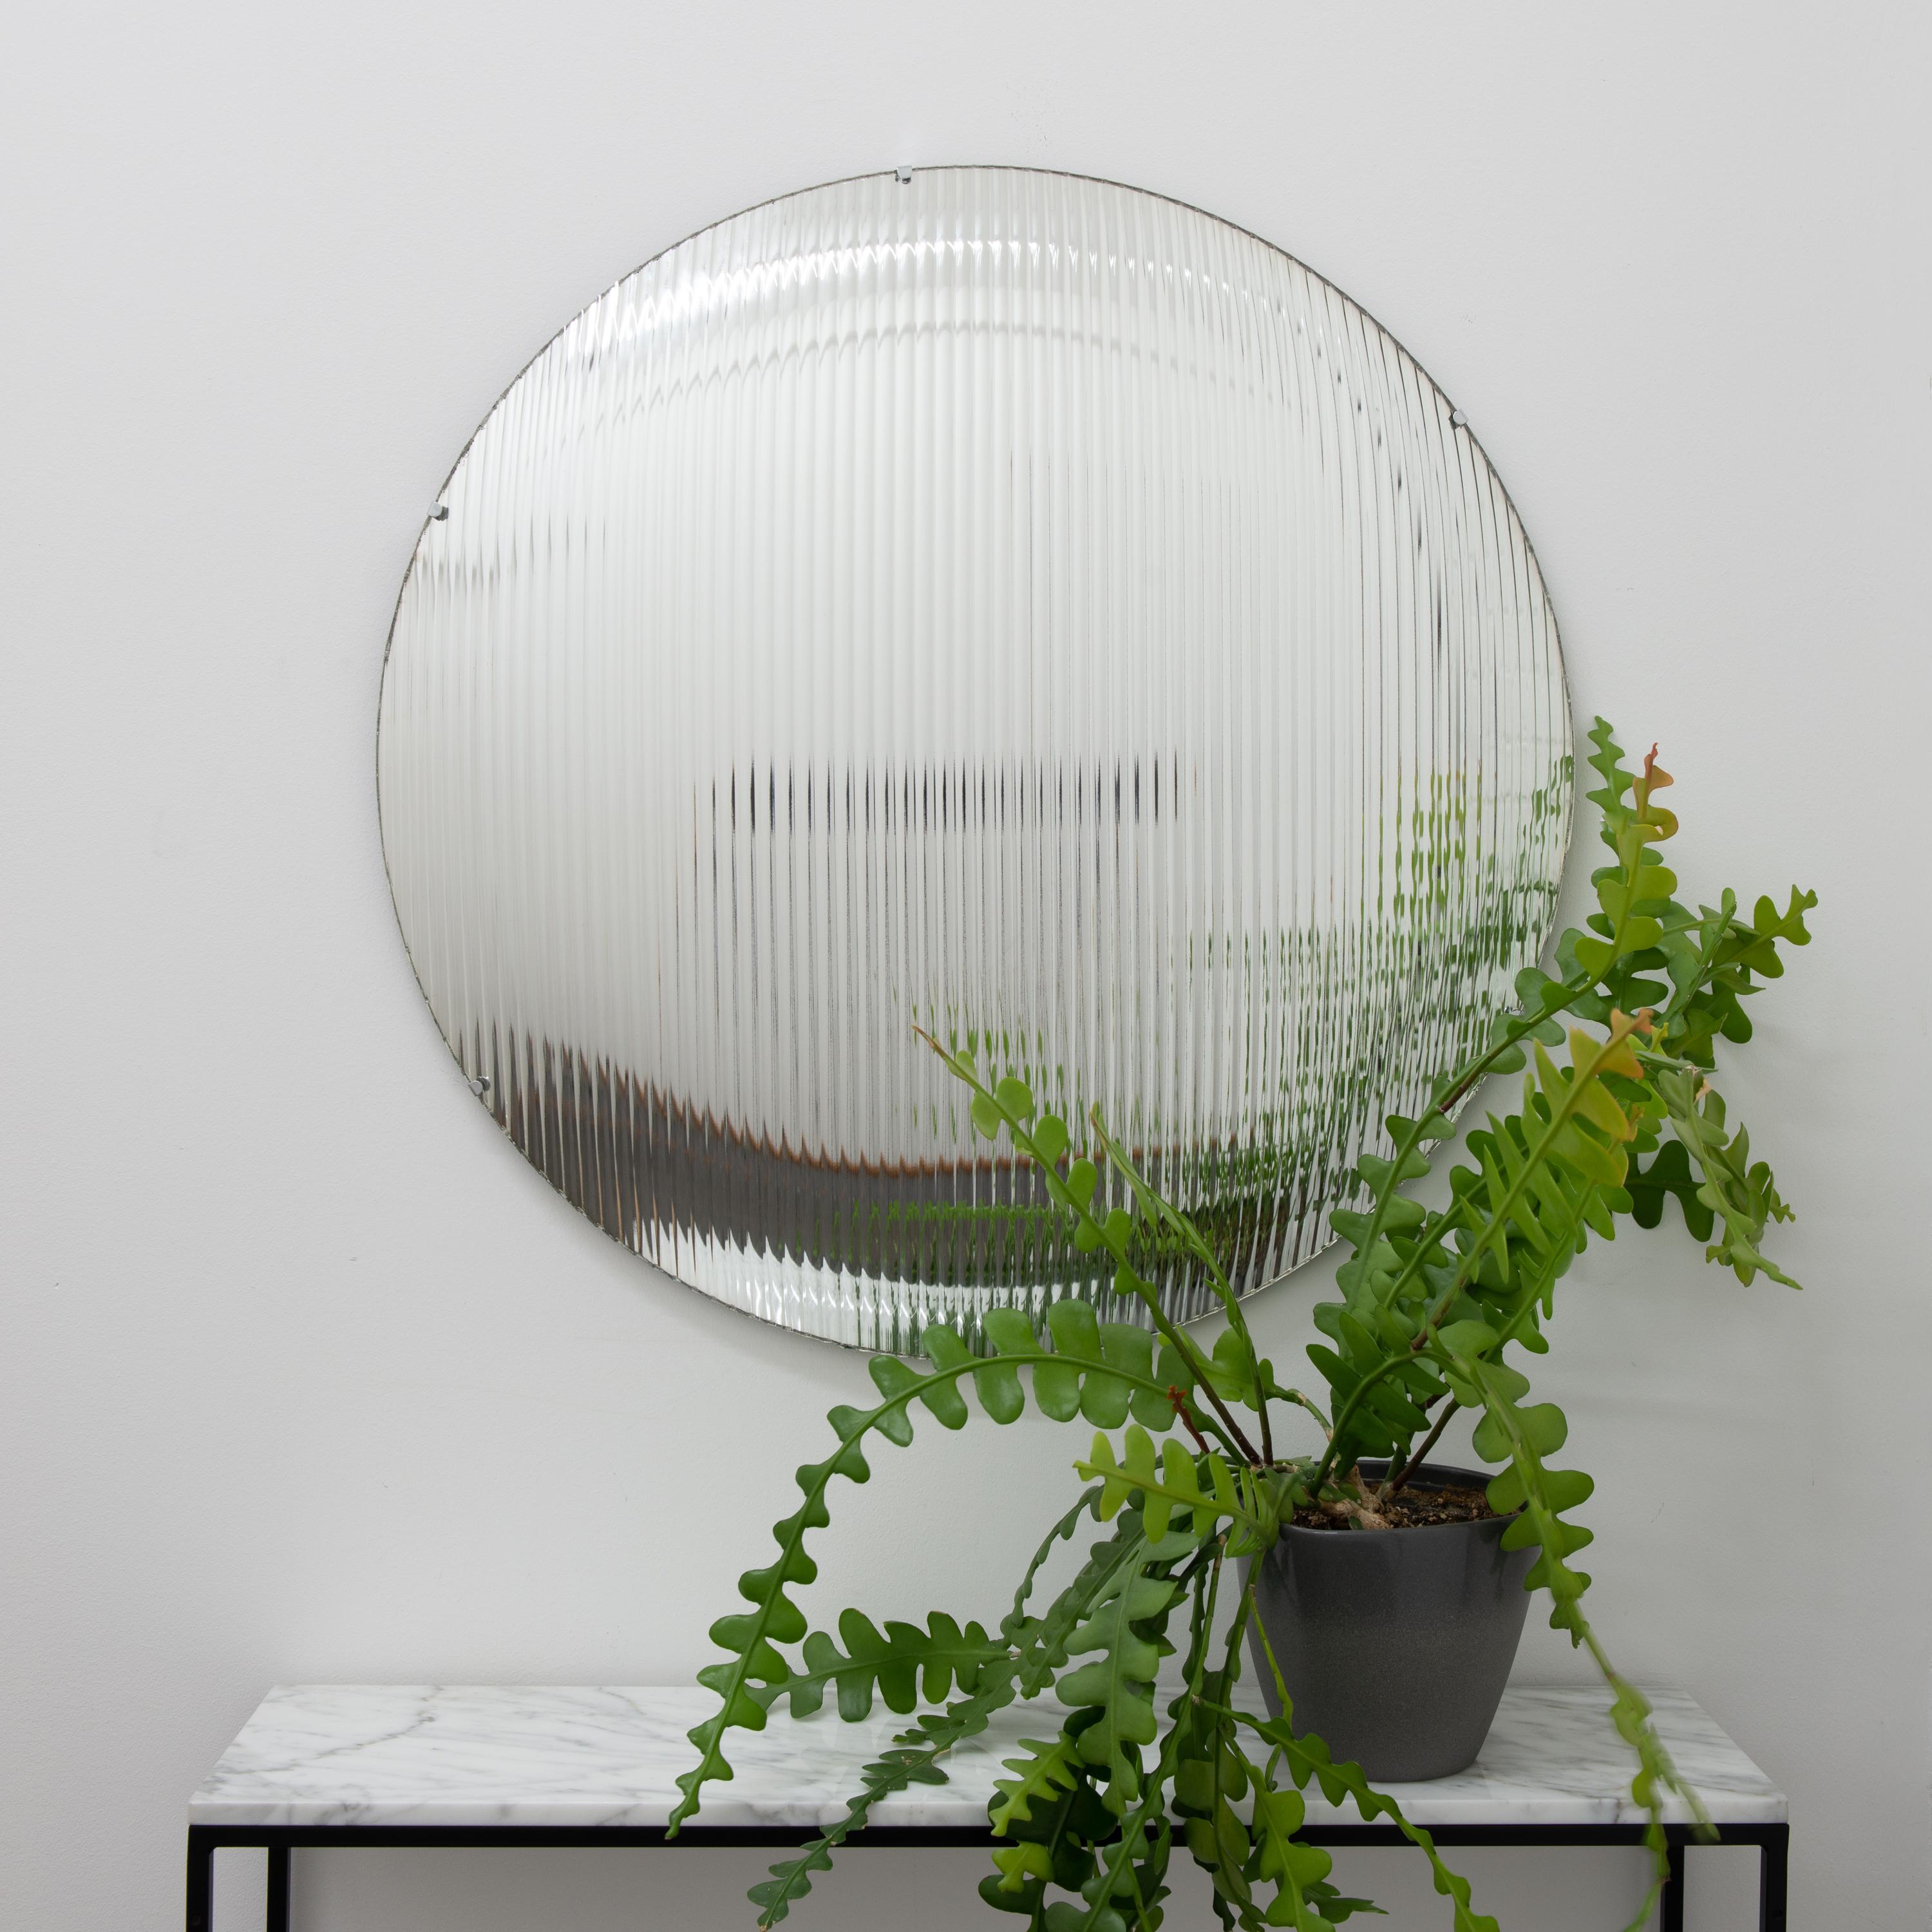 Stunning reeded glass round convex frameless mirror with stainless steel clips.

Each Orbis™ convex mirror is designed and handcrafted in London, UK. Slight variations in sizes and imperfections on edges and surface finishes are characteristics of